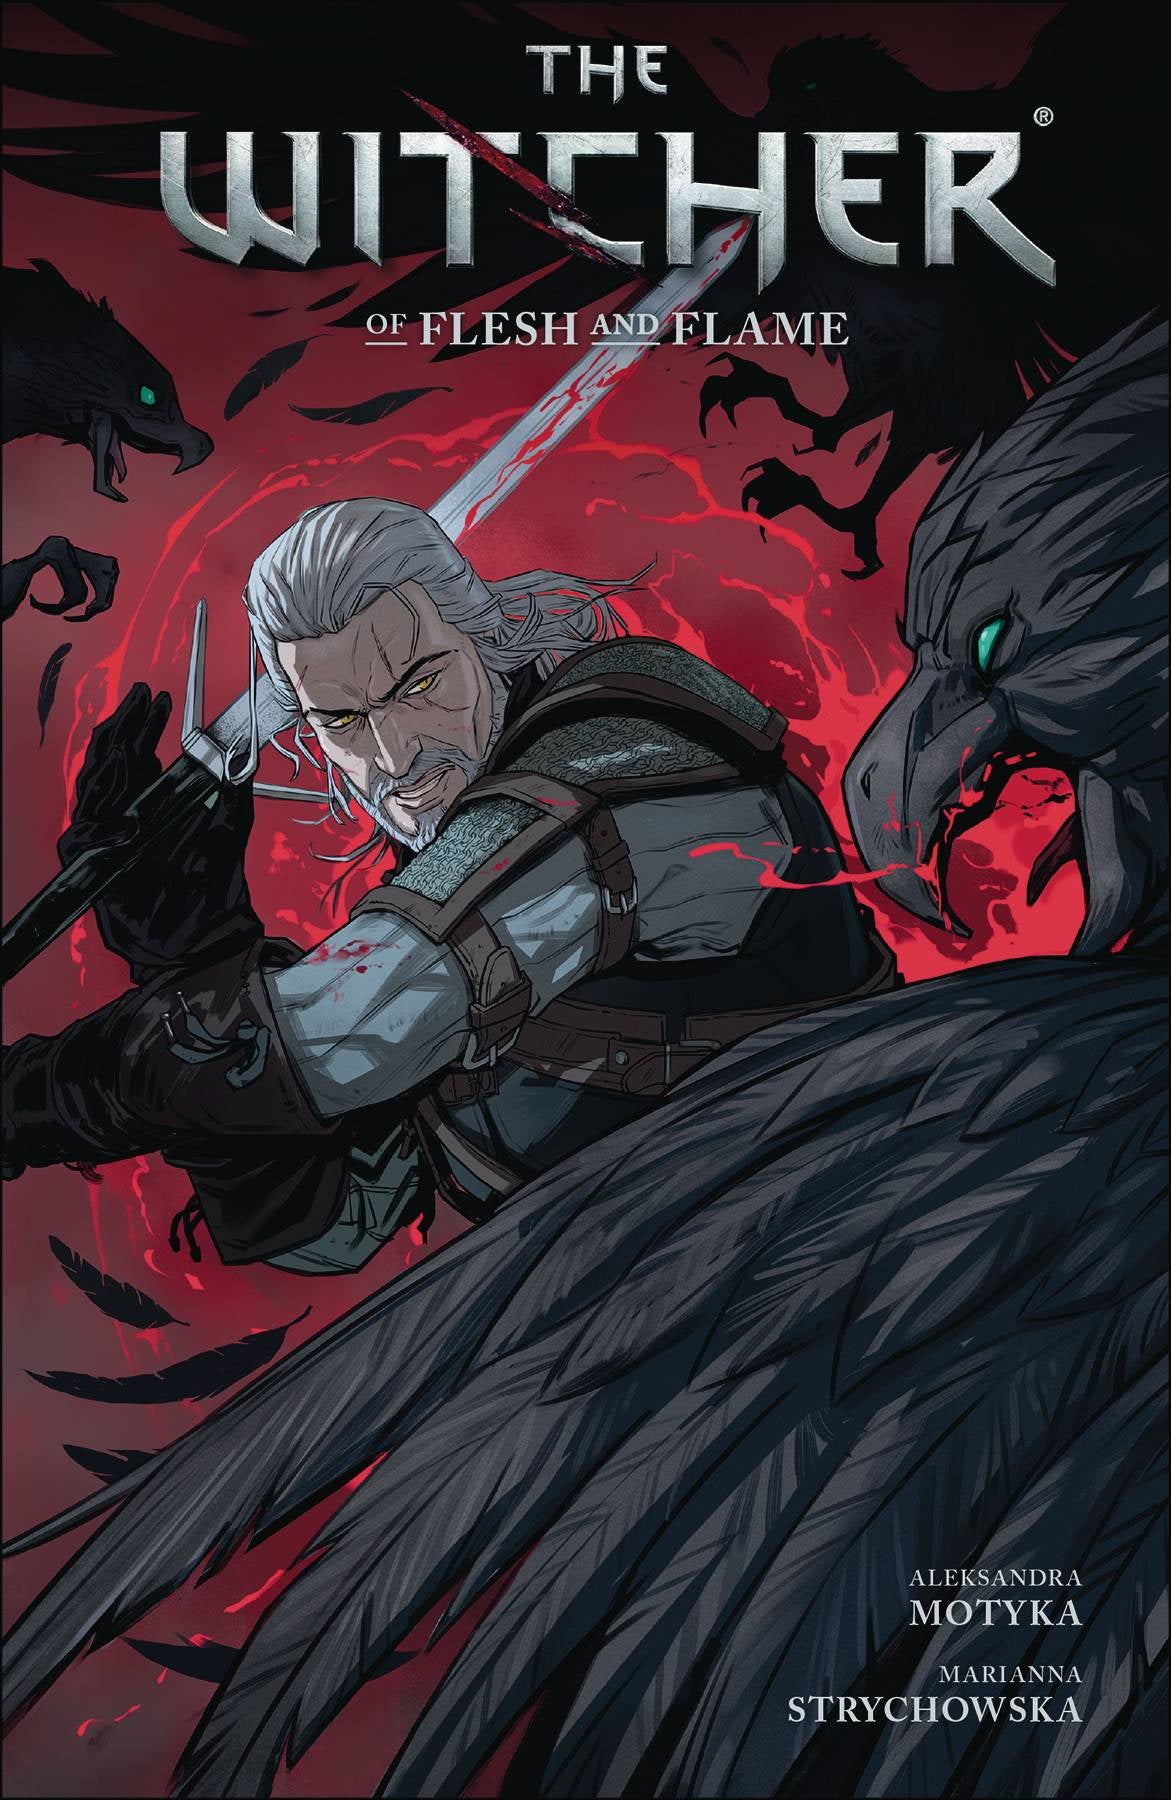 WITCHER VOLUME 04 OF FLESH AND FLAME